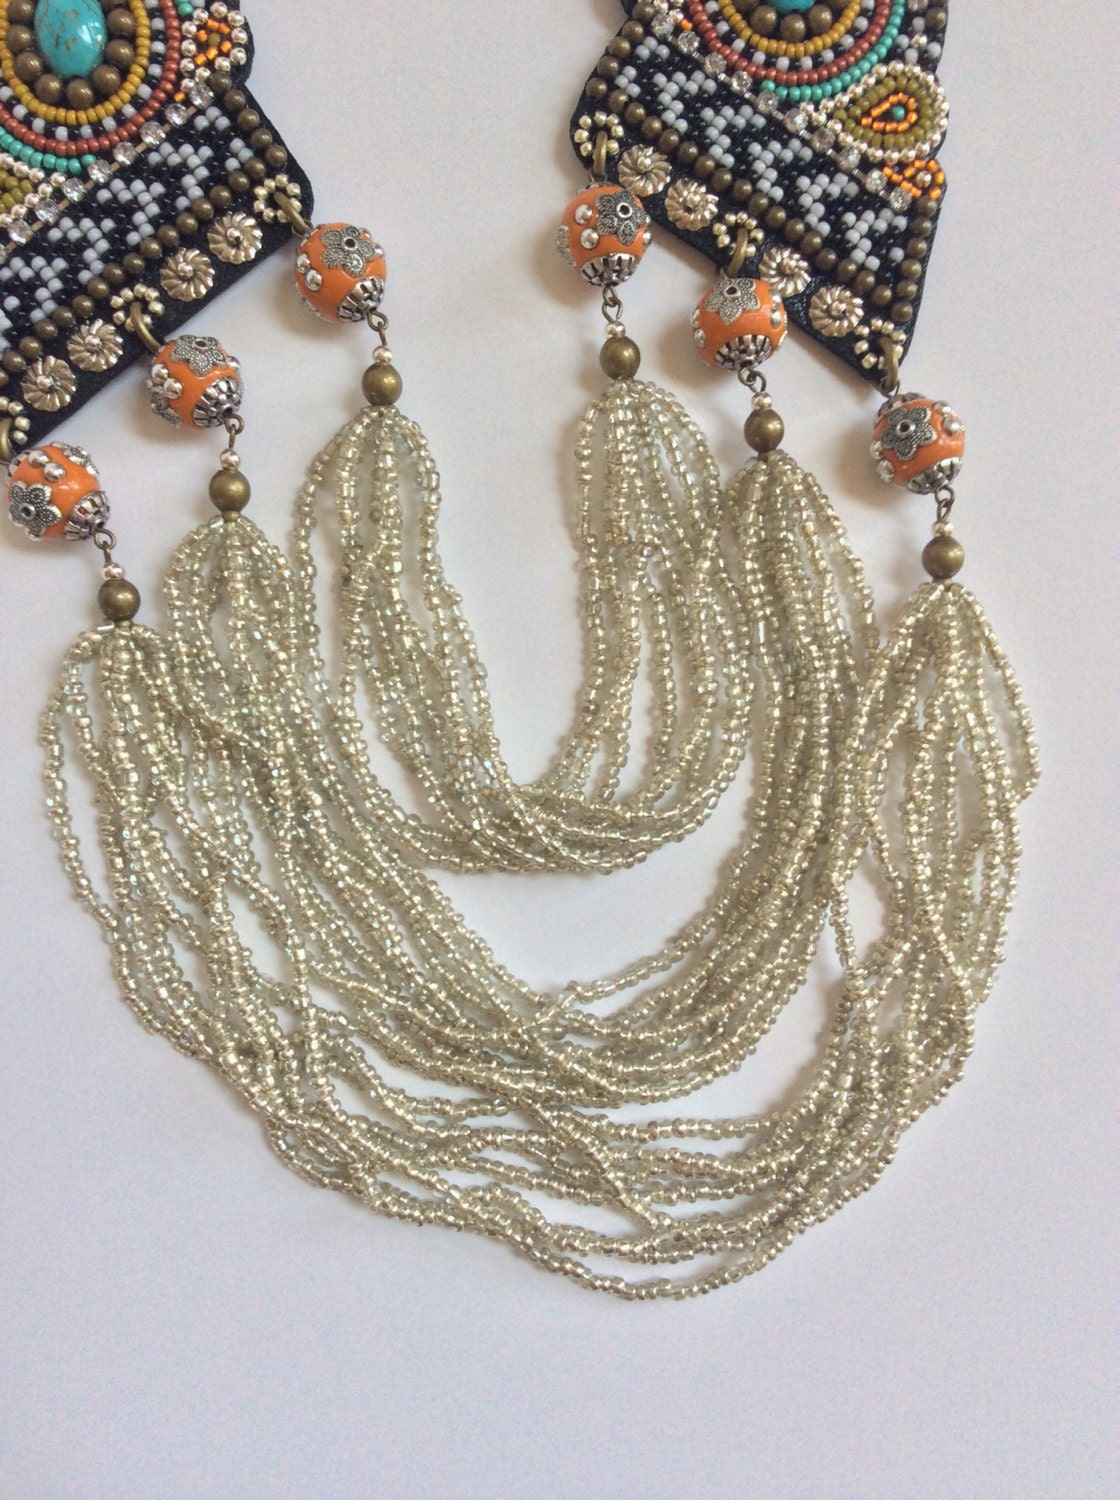 Bead Embroidery Necklace Statement Necklace